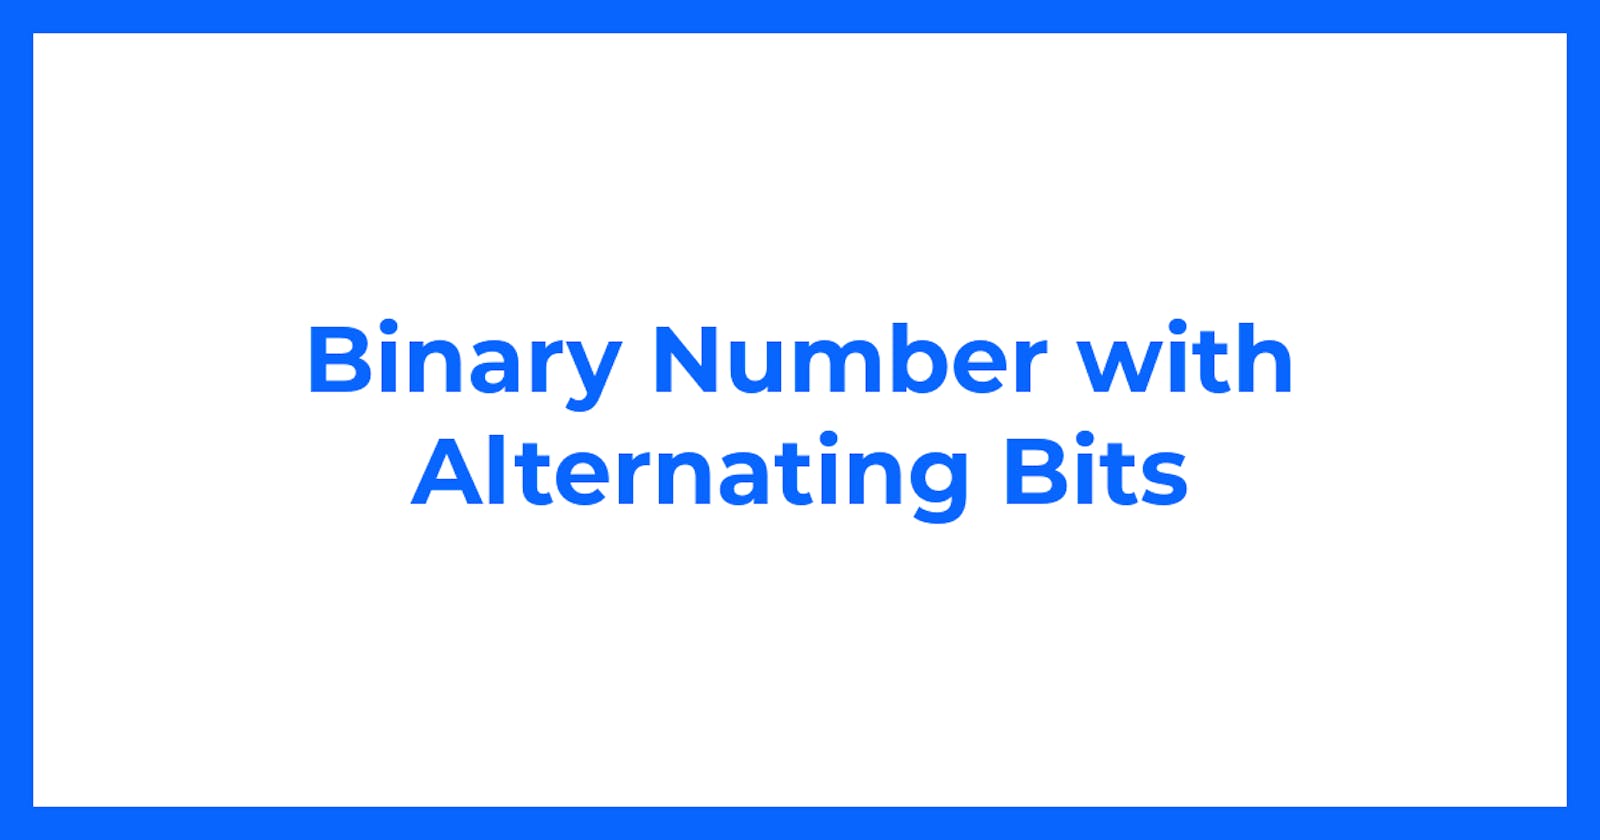 Binary Number with Alternating Bits